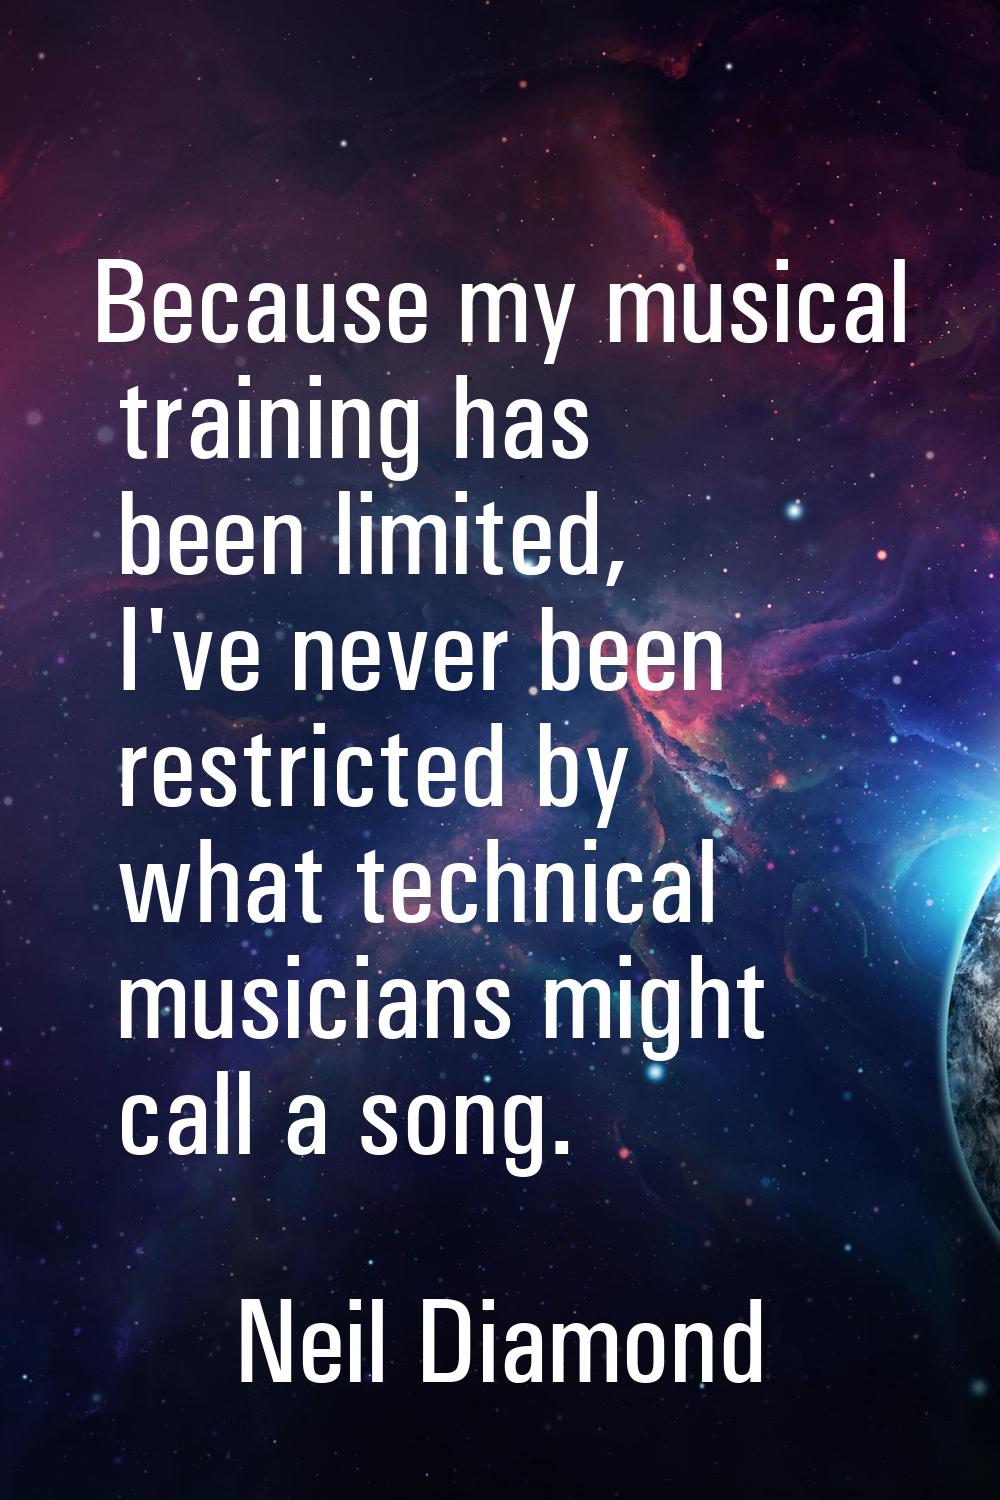 Because my musical training has been limited, I've never been restricted by what technical musician